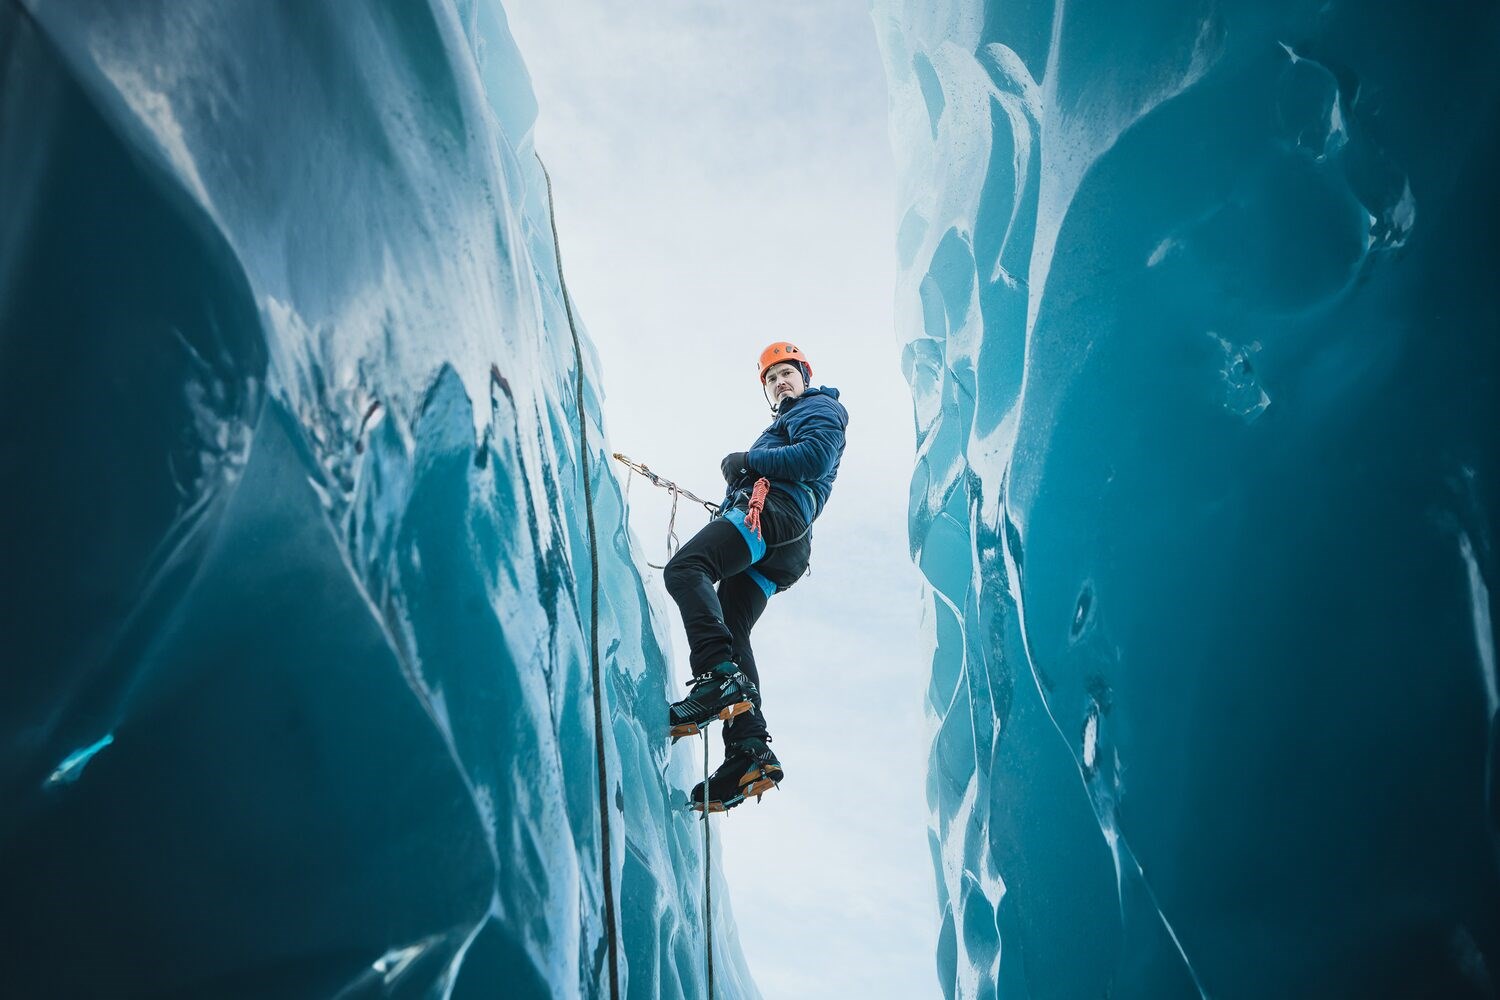 Climber ascends a glacial crevasse in Skaftafell, Iceland, equipped with ice axes and crampons against a backdrop of brilliant blue ice.